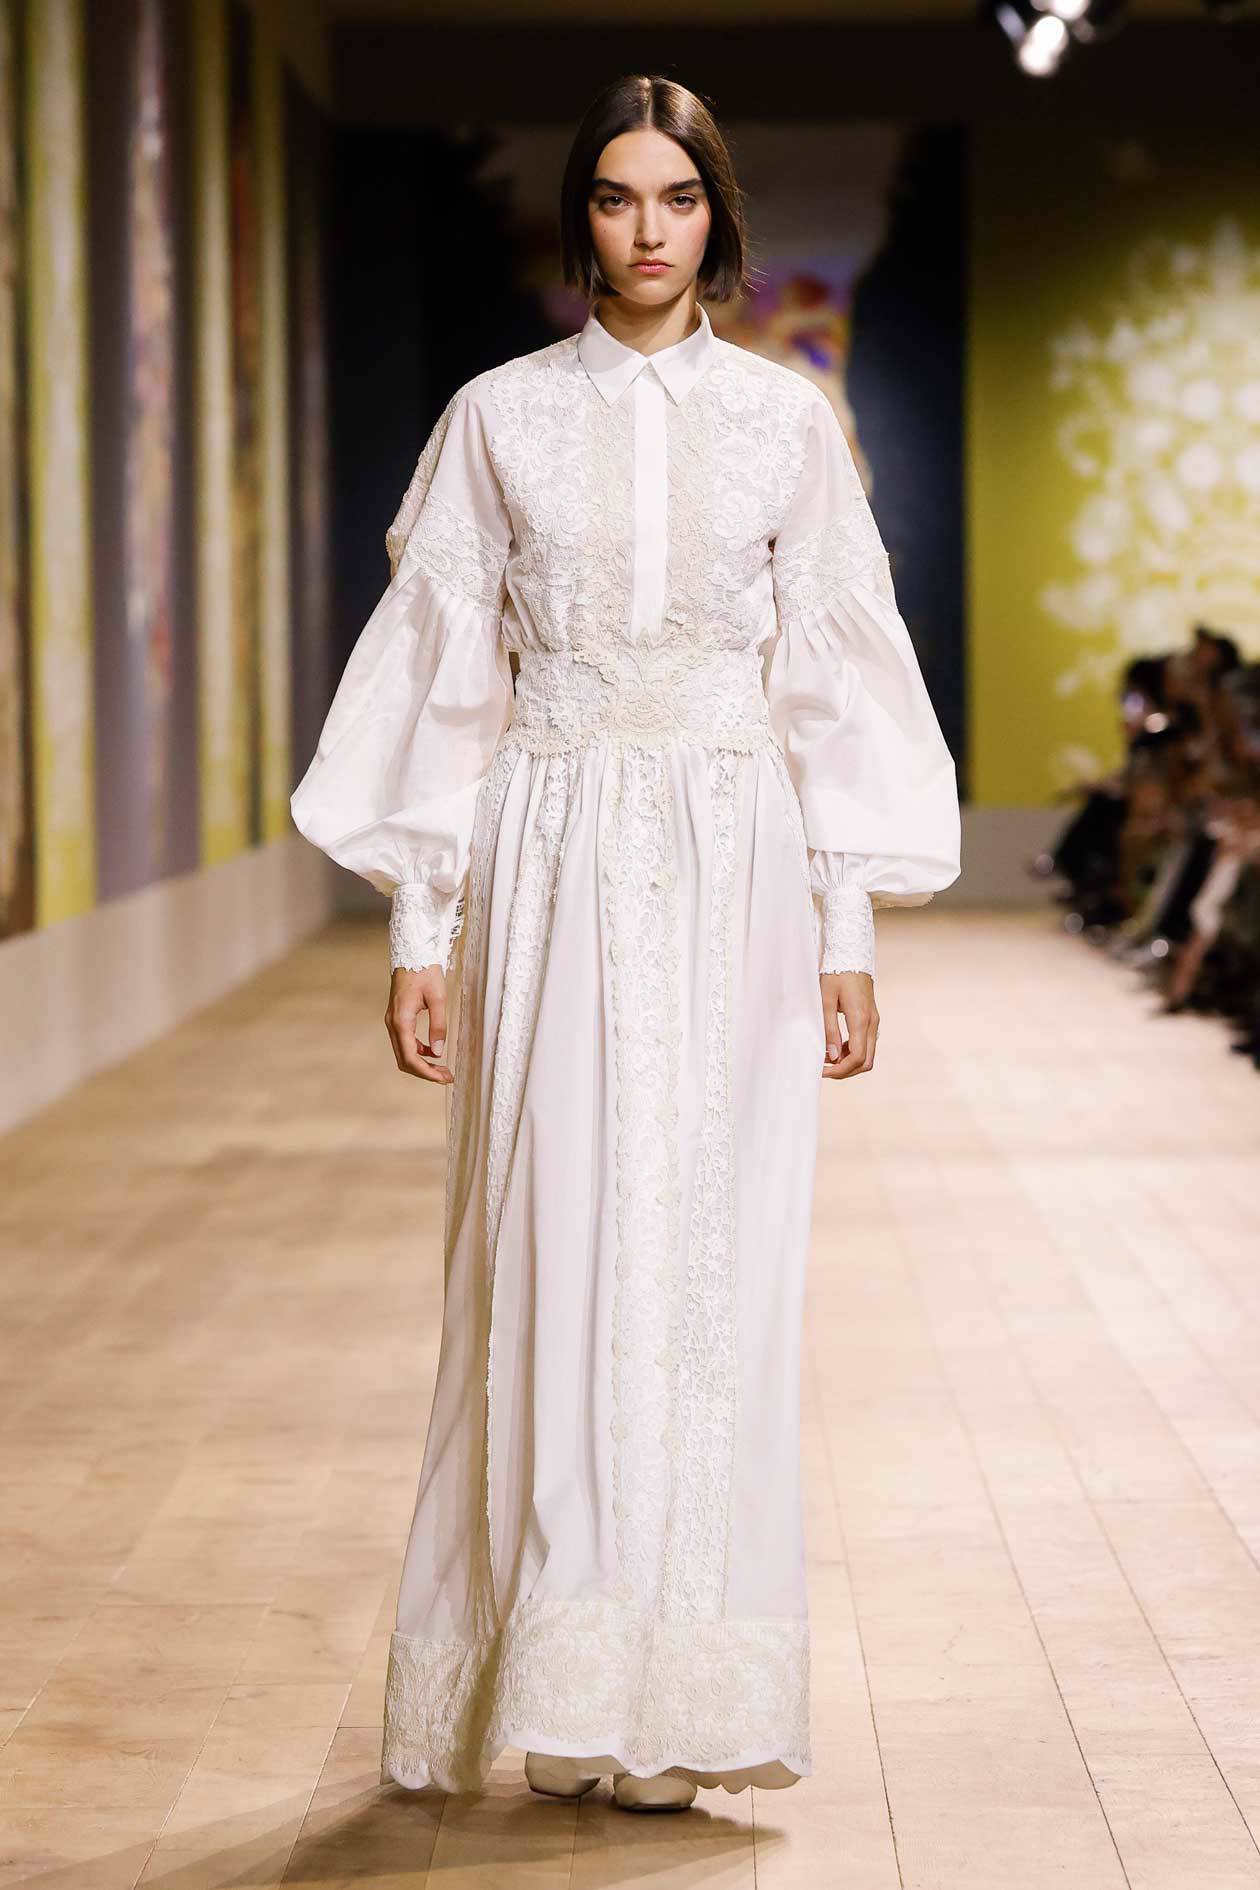 PASSAGE 2 - NUMÉRO 519 Silk and cotton veil dress inlaid with an ecru and white floral guipure band. COPYRIGHT: Dior